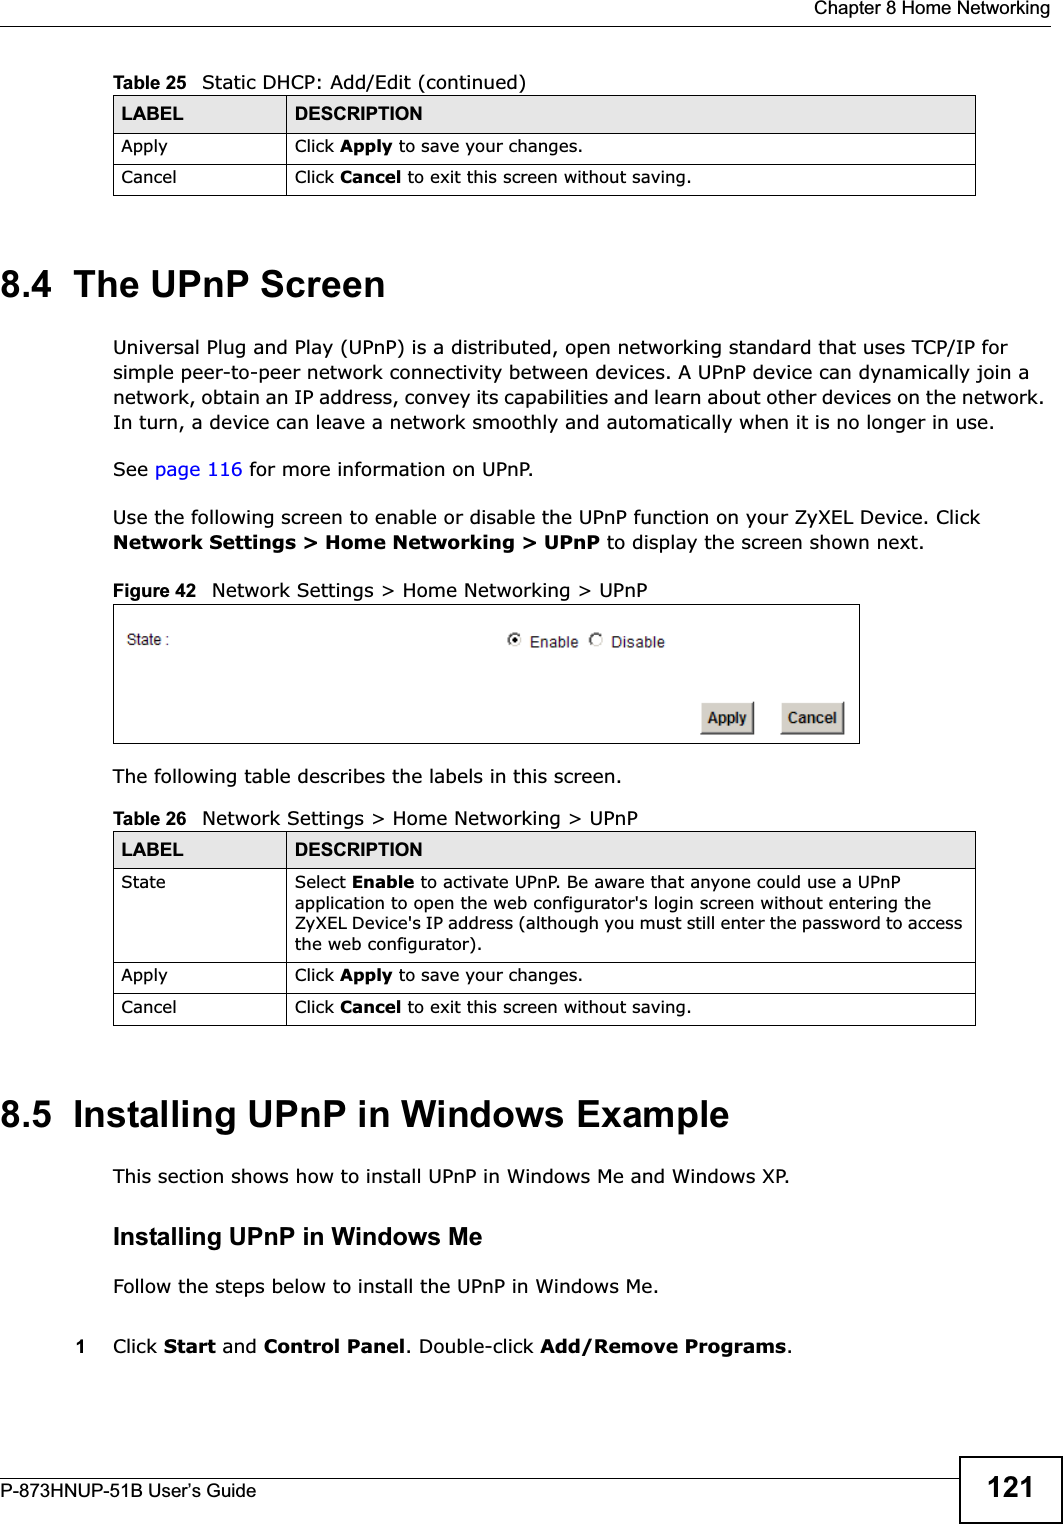  Chapter 8 Home NetworkingP-873HNUP-51B User’s Guide 1218.4  The UPnP ScreenUniversal Plug and Play (UPnP) is a distributed, open networking standard that uses TCP/IP for simple peer-to-peer network connectivity between devices. A UPnP device can dynamically join a network, obtain an IP address, convey its capabilities and learn about other devices on the network. In turn, a device can leave a network smoothly and automatically when it is no longer in use.See page 116 for more information on UPnP.Use the following screen to enable or disable the UPnP function on your ZyXEL Device. Click Network Settings &gt; Home Networking &gt; UPnP to display the screen shown next.Figure 42   Network Settings &gt; Home Networking &gt; UPnPThe following table describes the labels in this screen.8.5  Installing UPnP in Windows ExampleThis section shows how to install UPnP in Windows Me and Windows XP. Installing UPnP in Windows MeFollow the steps below to install the UPnP in Windows Me. 1Click Start and Control Panel. Double-click Add/Remove Programs.Apply Click Apply to save your changes.Cancel Click Cancel to exit this screen without saving.Table 25   Static DHCP: Add/Edit (continued)LABEL DESCRIPTIONTable 26   Network Settings &gt; Home Networking &gt; UPnPLABEL DESCRIPTIONState Select Enable to activate UPnP. Be aware that anyone could use a UPnP application to open the web configurator&apos;s login screen without entering the ZyXEL Device&apos;s IP address (although you must still enter the password to access the web configurator).Apply Click Apply to save your changes.Cancel Click Cancel to exit this screen without saving.